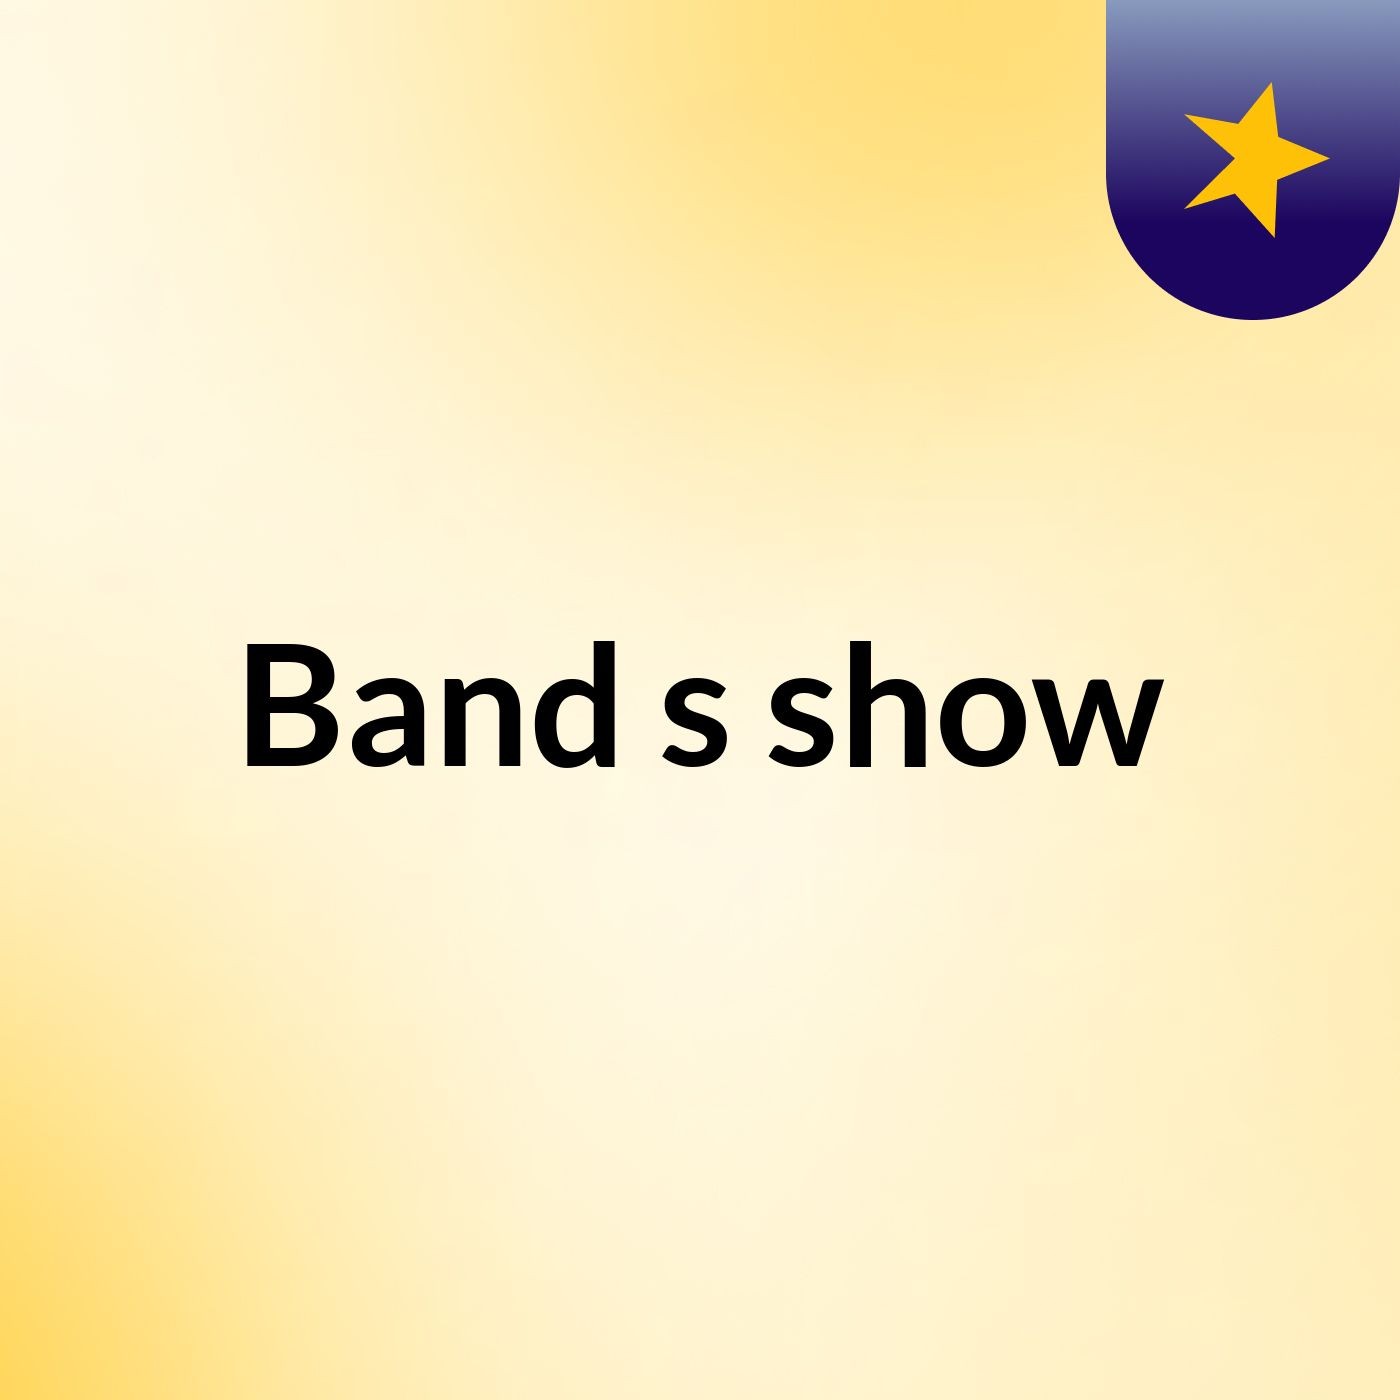 Band's show